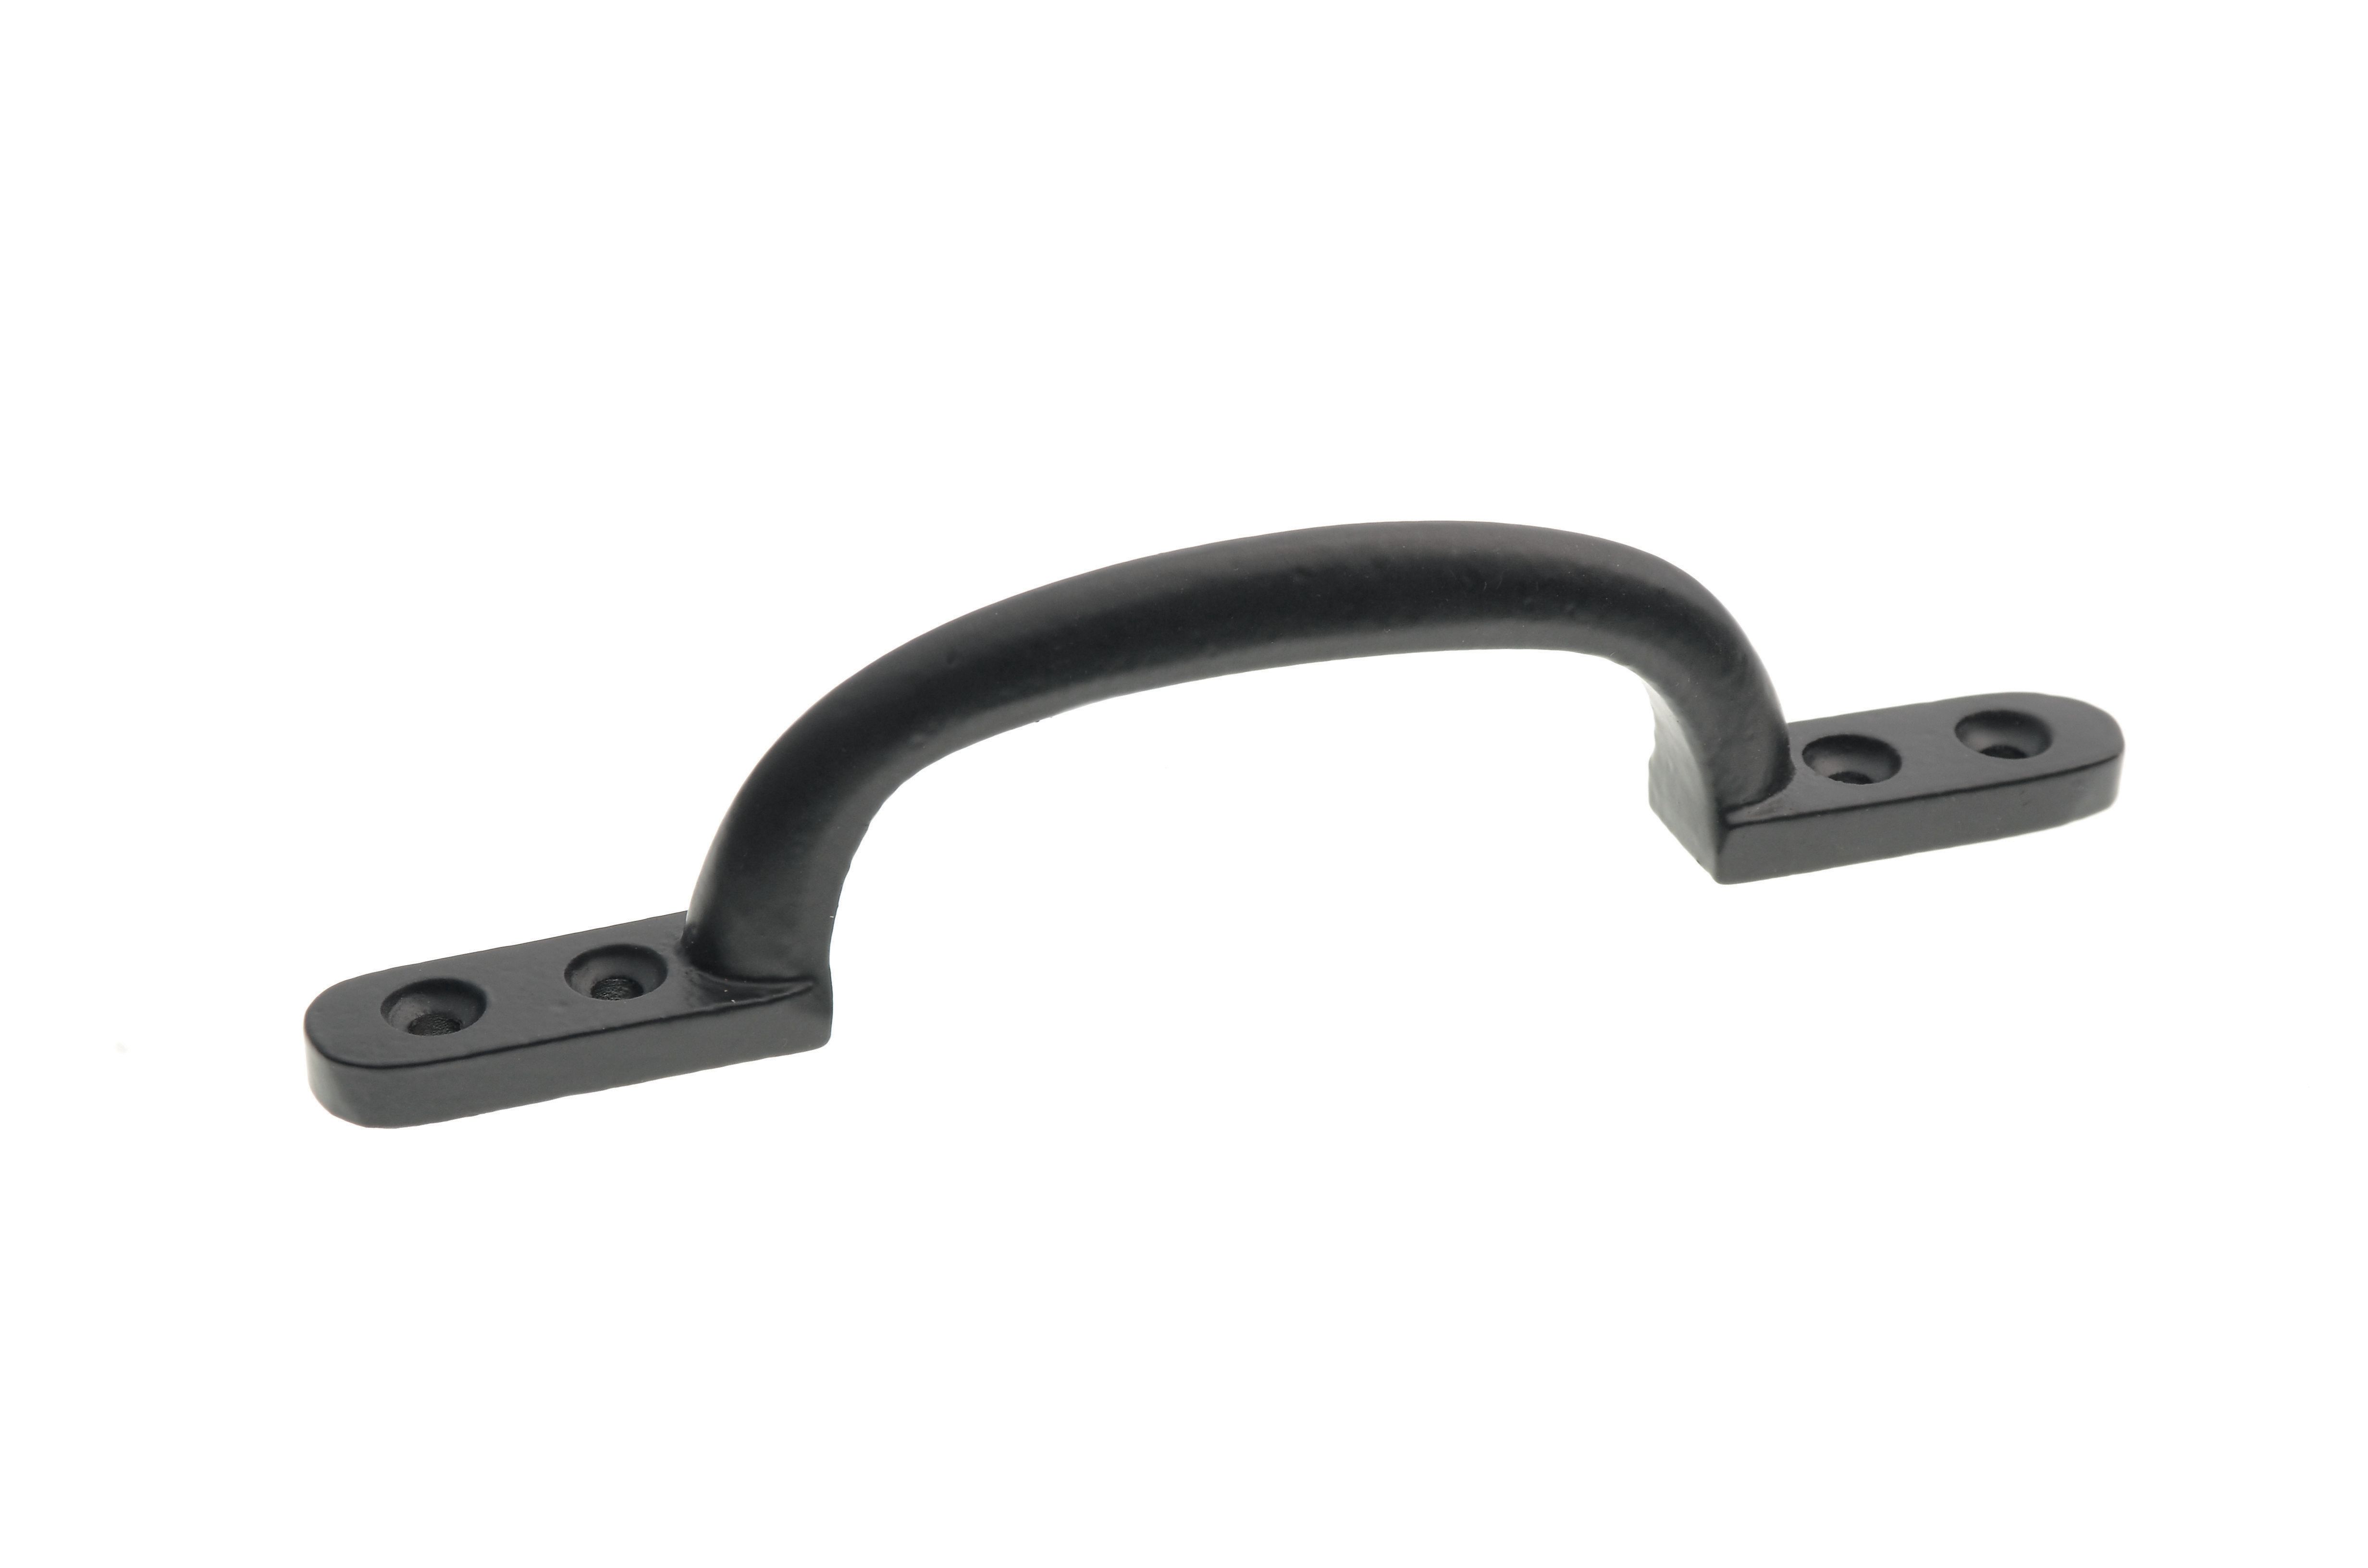 Wickes Bow Pull Handle - Black 150mm